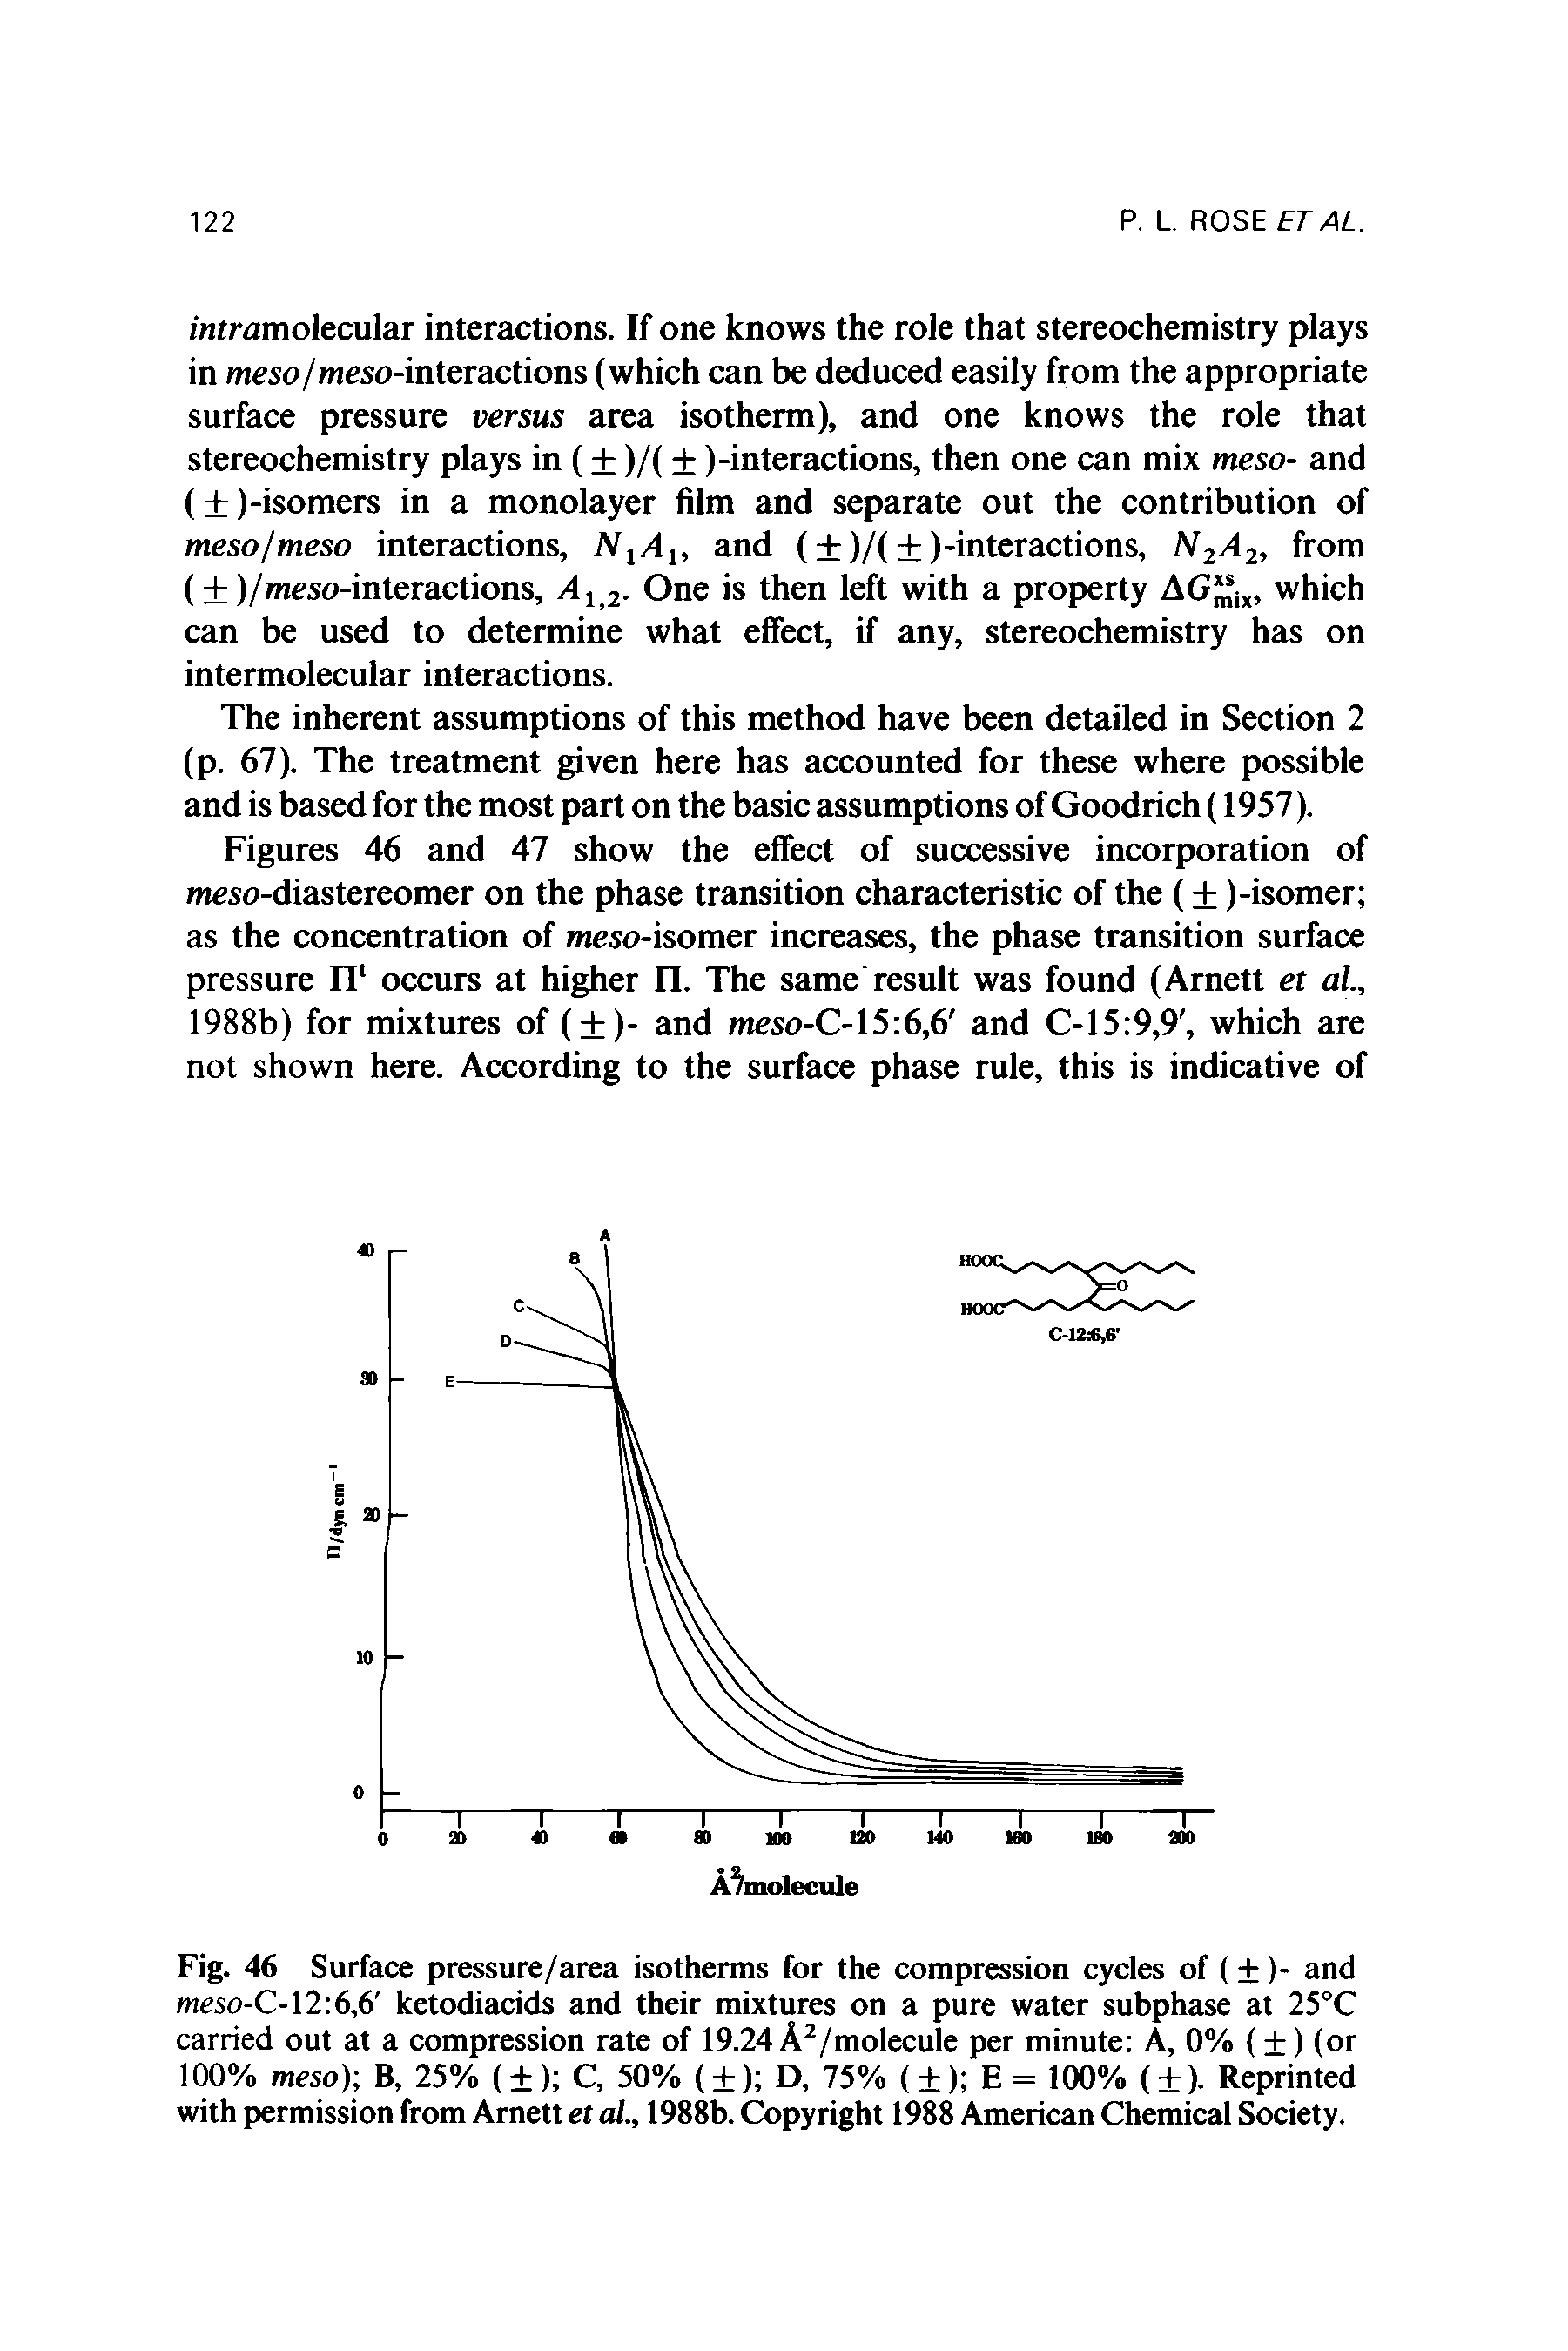 Figures 46 and 47 show the effect of successive incorporation of meso-diastereomer on the phase transition characteristic of the ( )-isomer as the concentration of meso-isomer increases, the phase transition surface pressure IT occurs at higher n. The same result was found (Arnett et al., 1988b) for mixtures of ( )- and meso-C-15 6,6 and C-15 9,9, which are not shown here. According to the surface phase rule, this is indicative of...